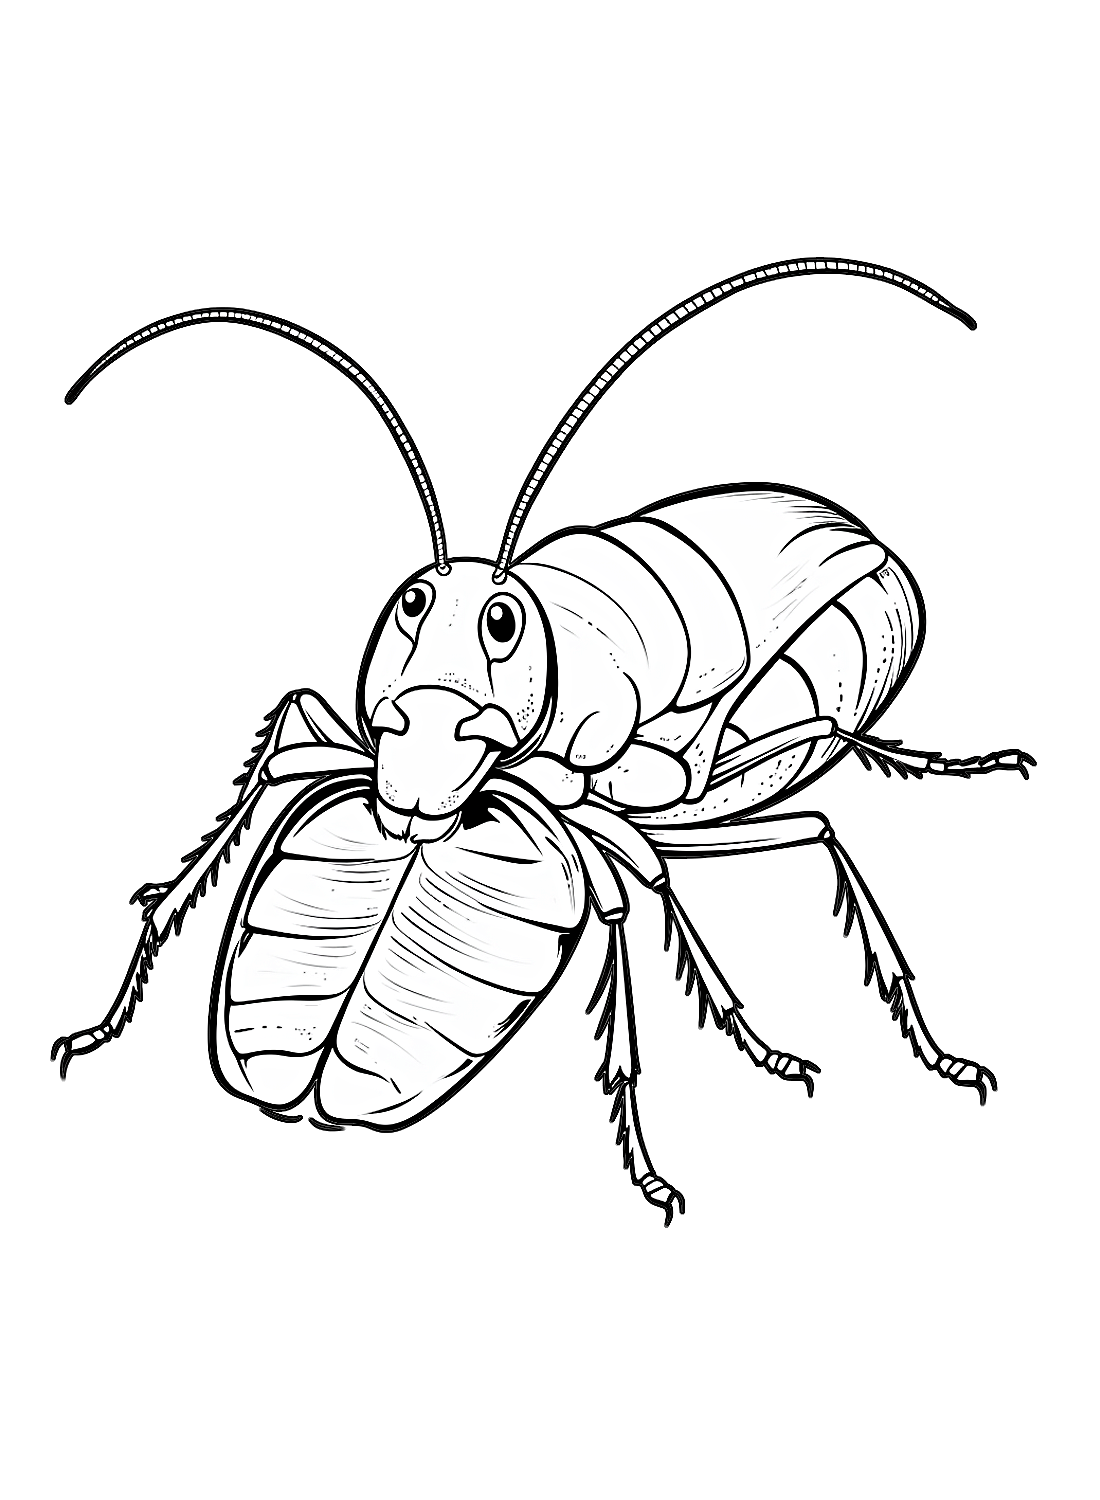 Cockroach is eating leaves Coloring Pages